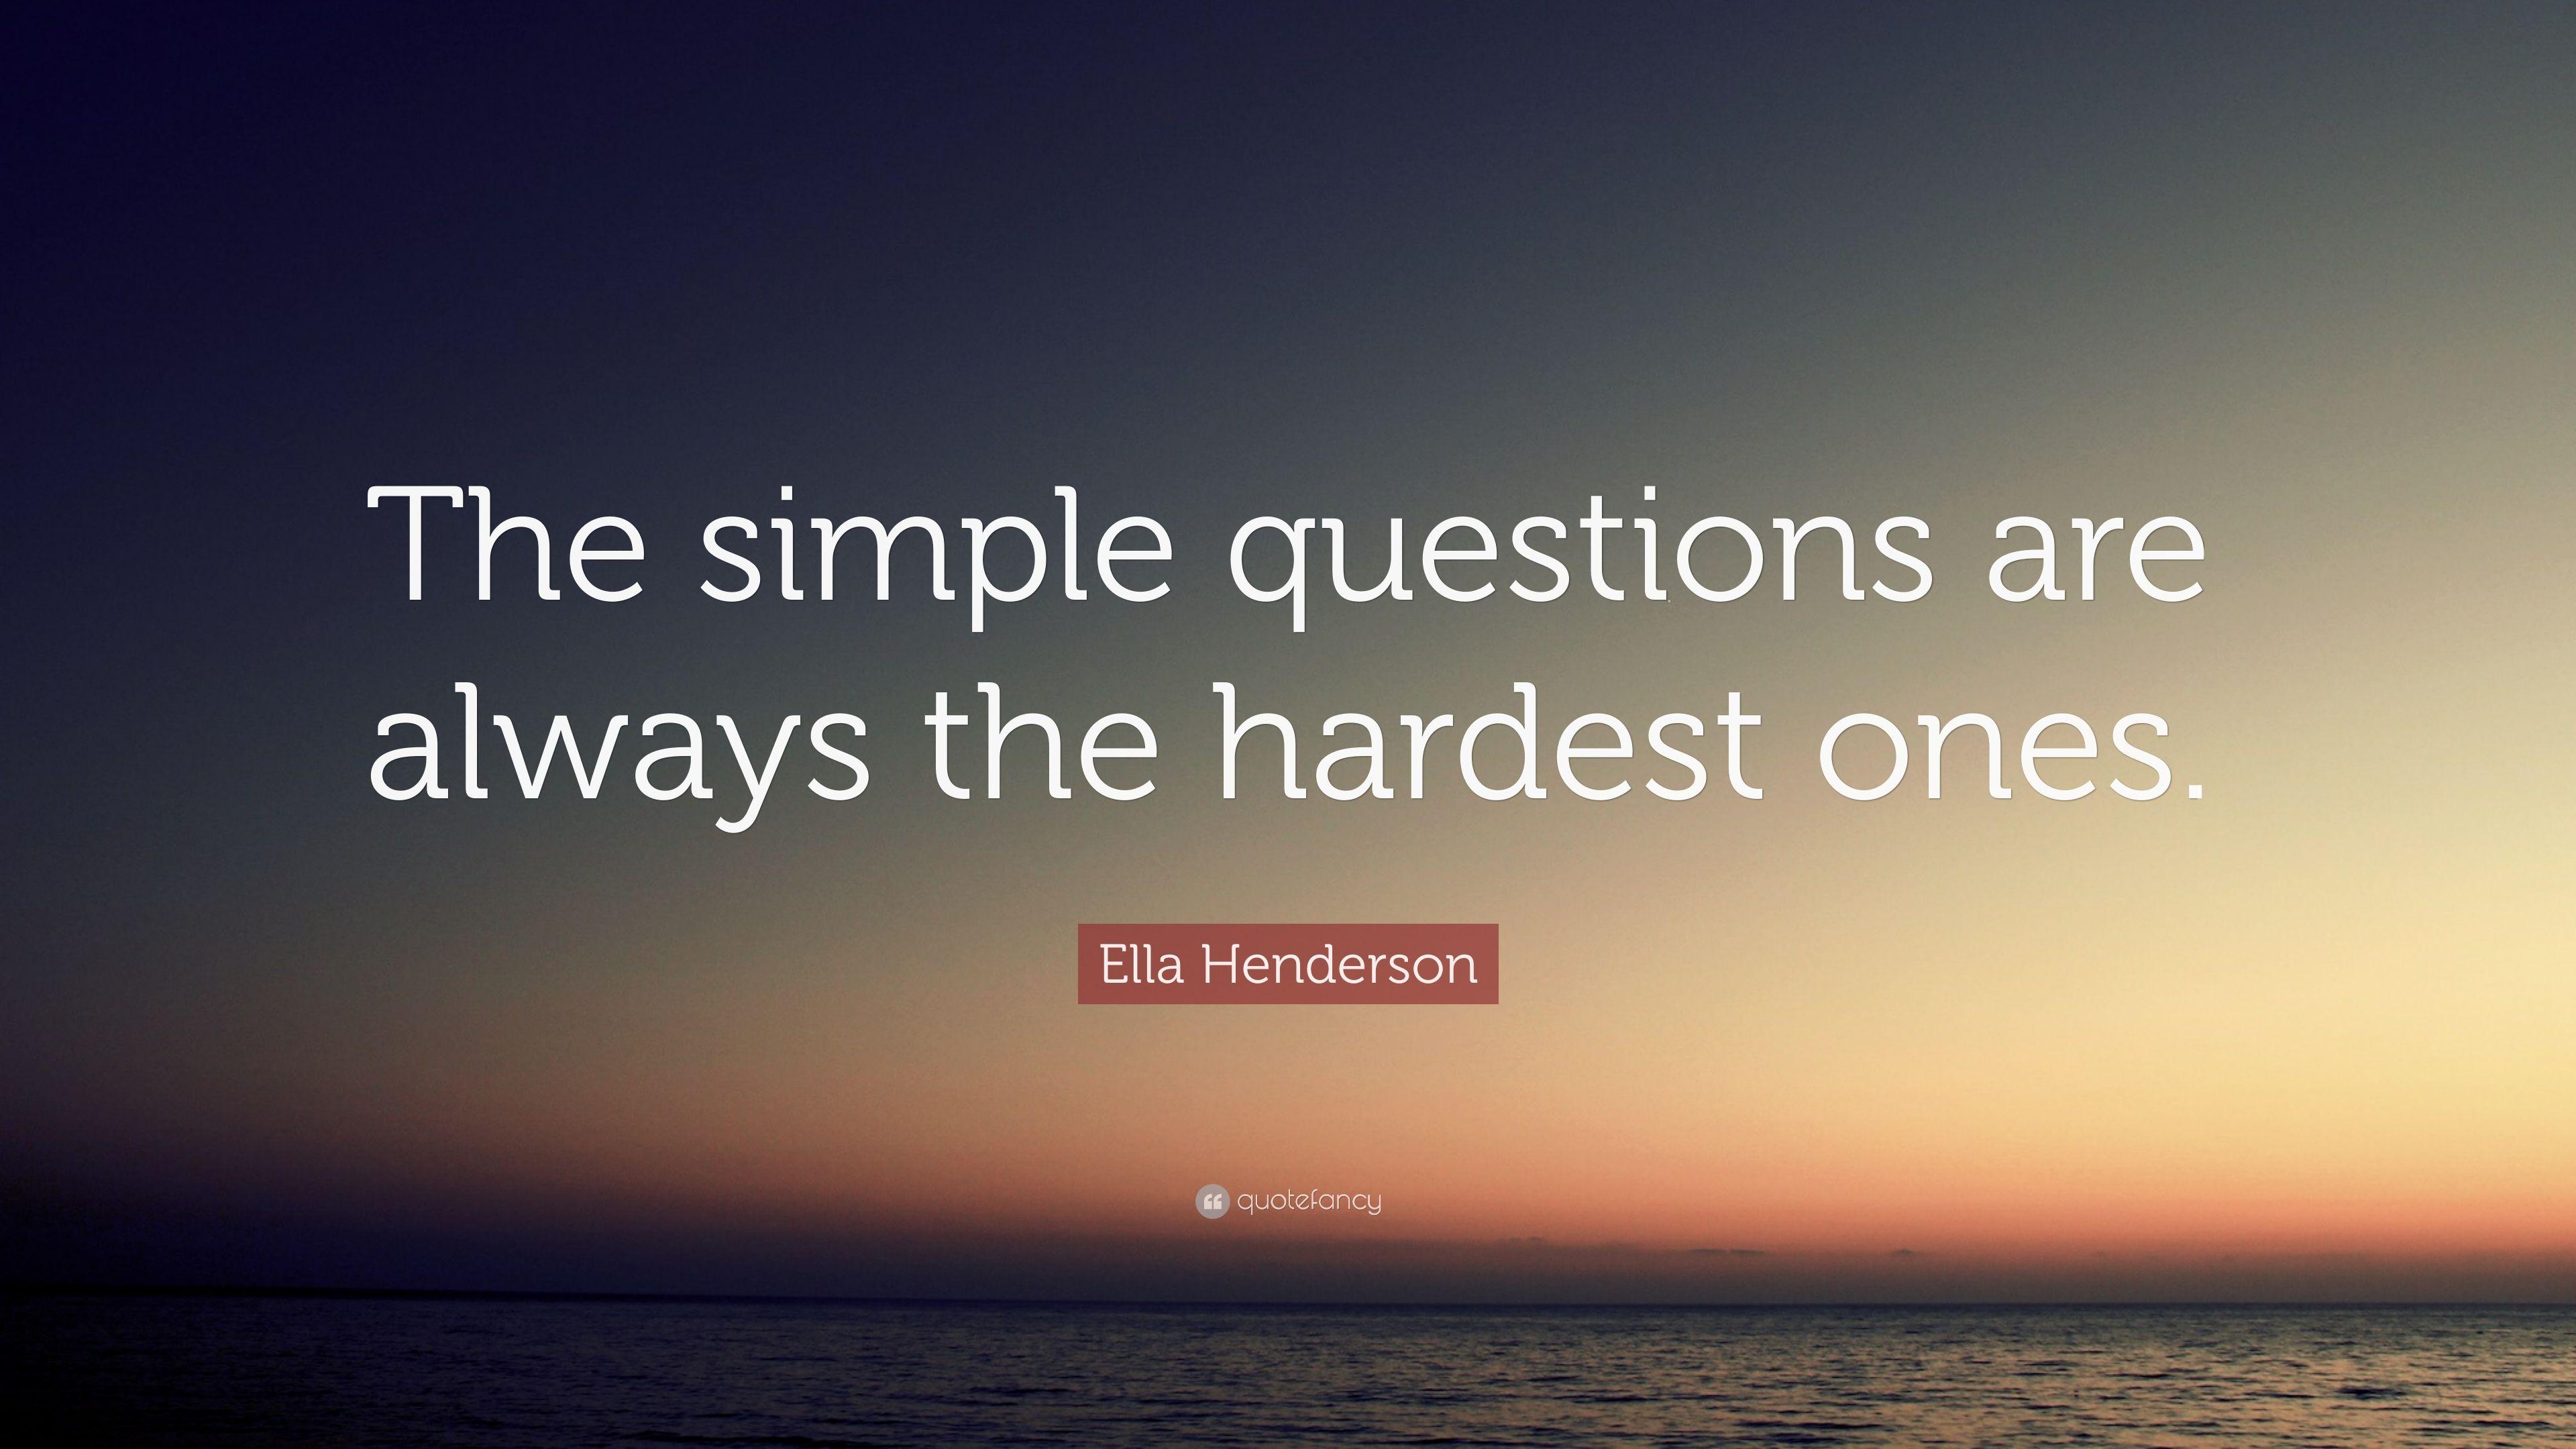 Ella Henderson Quote: “The simple questions are always